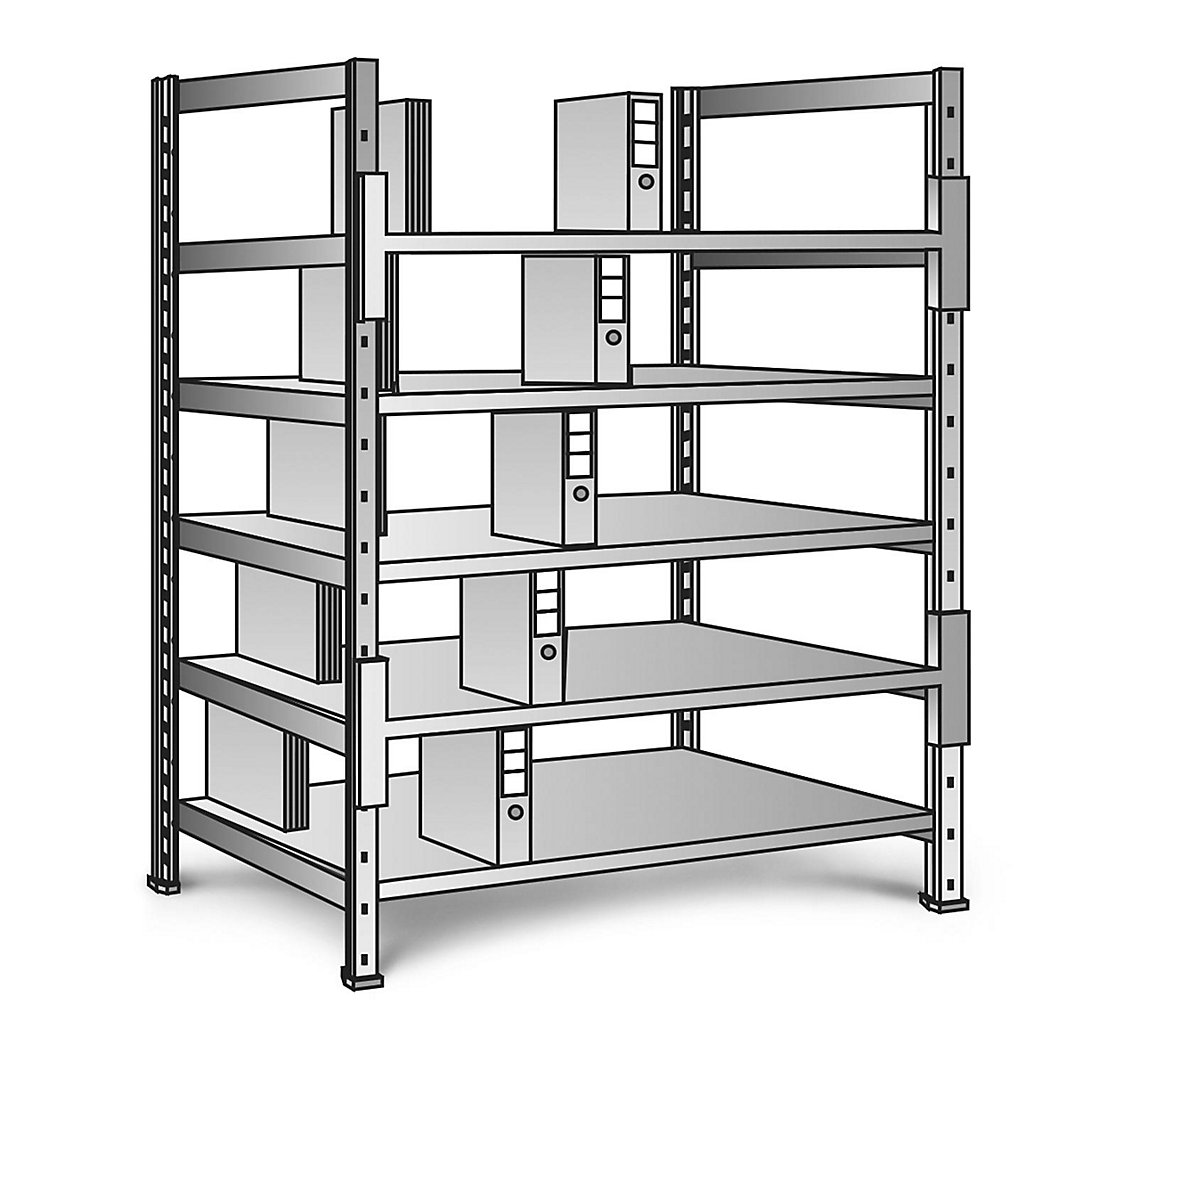 Boltless shelving units for files and archives, zinc plated, height 1920 mm, double sided, shelf WxD 1200 x 600 mm, standard shelf unit-4